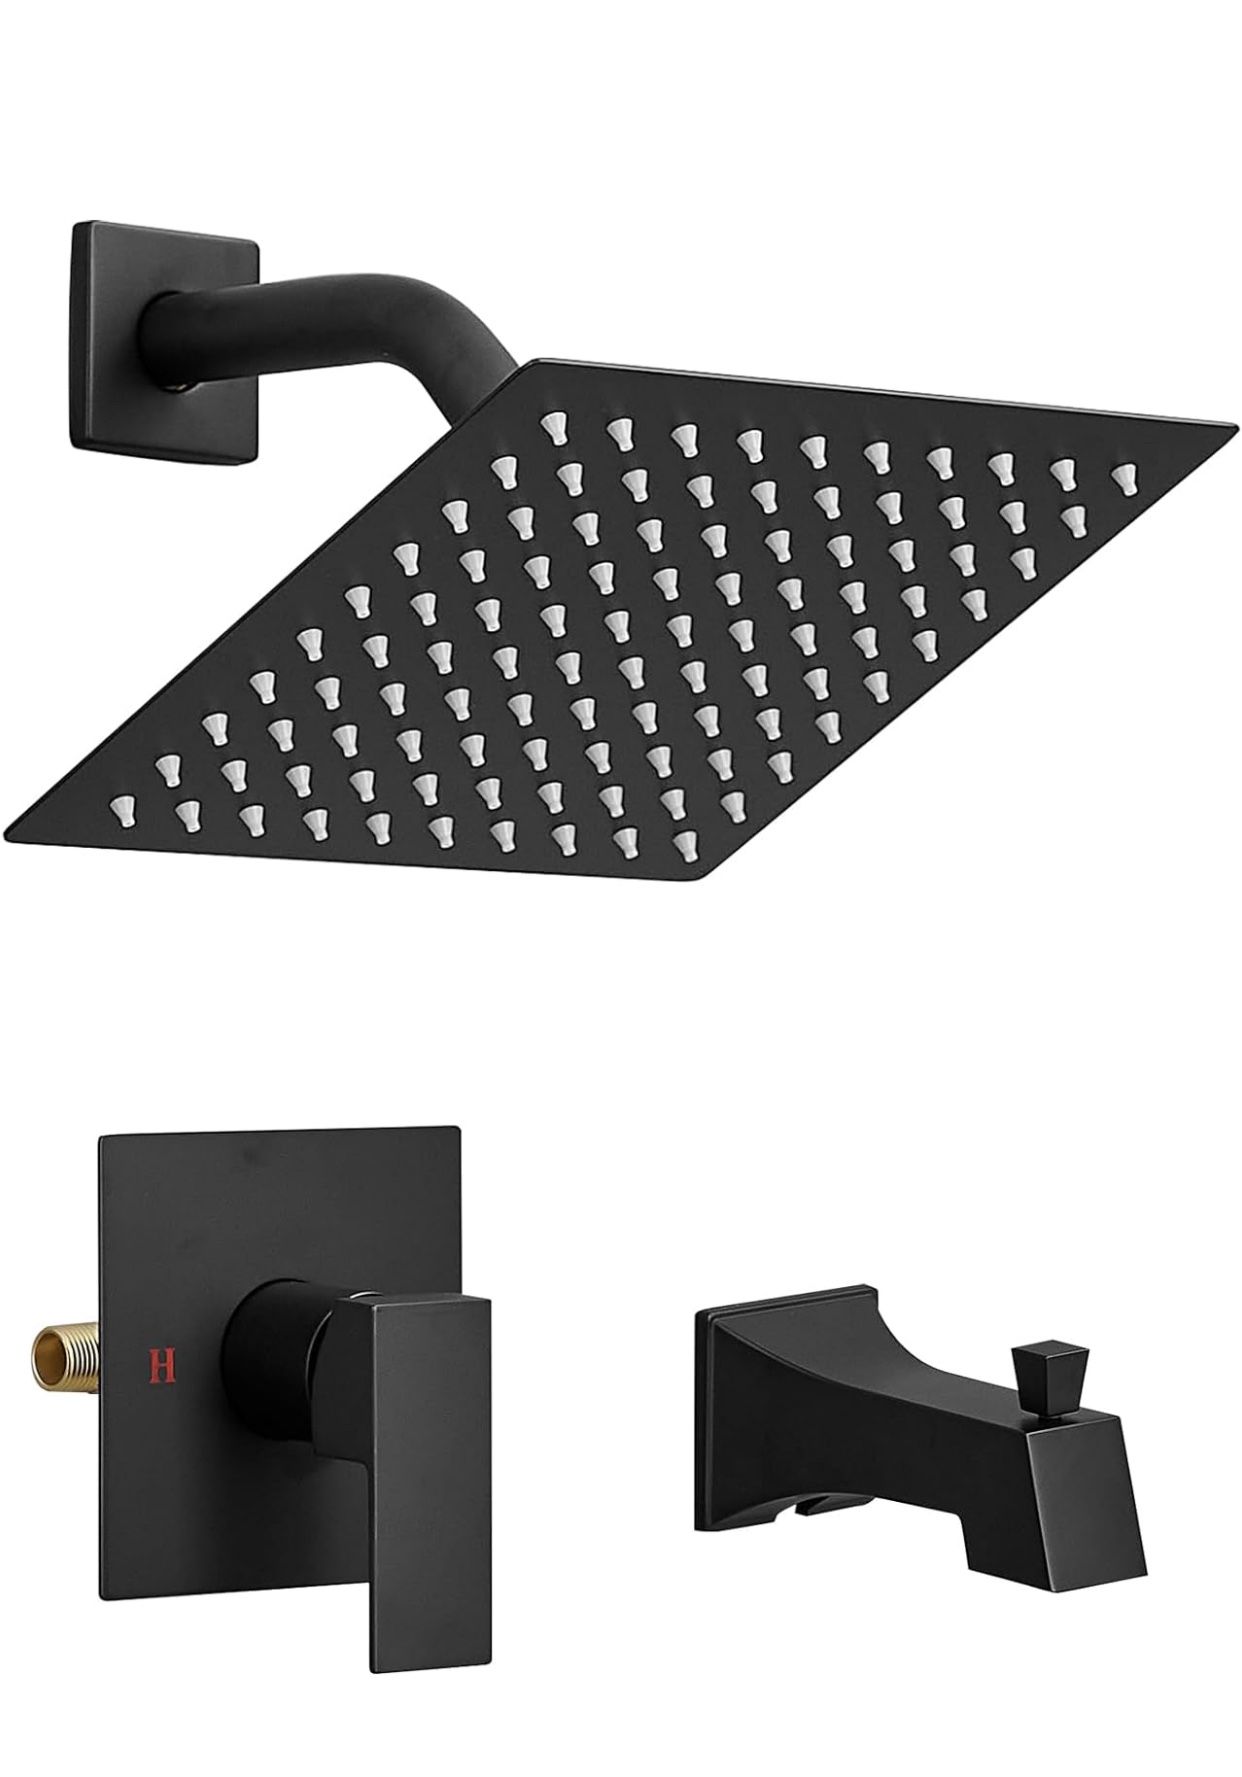 Matte Black Shower Faucet Set 8 Inch Square Rainfall Shower Head with Tub Spout Bathtub Shower System Wall Mounted Stainless Steel Shower Combo Set Ro